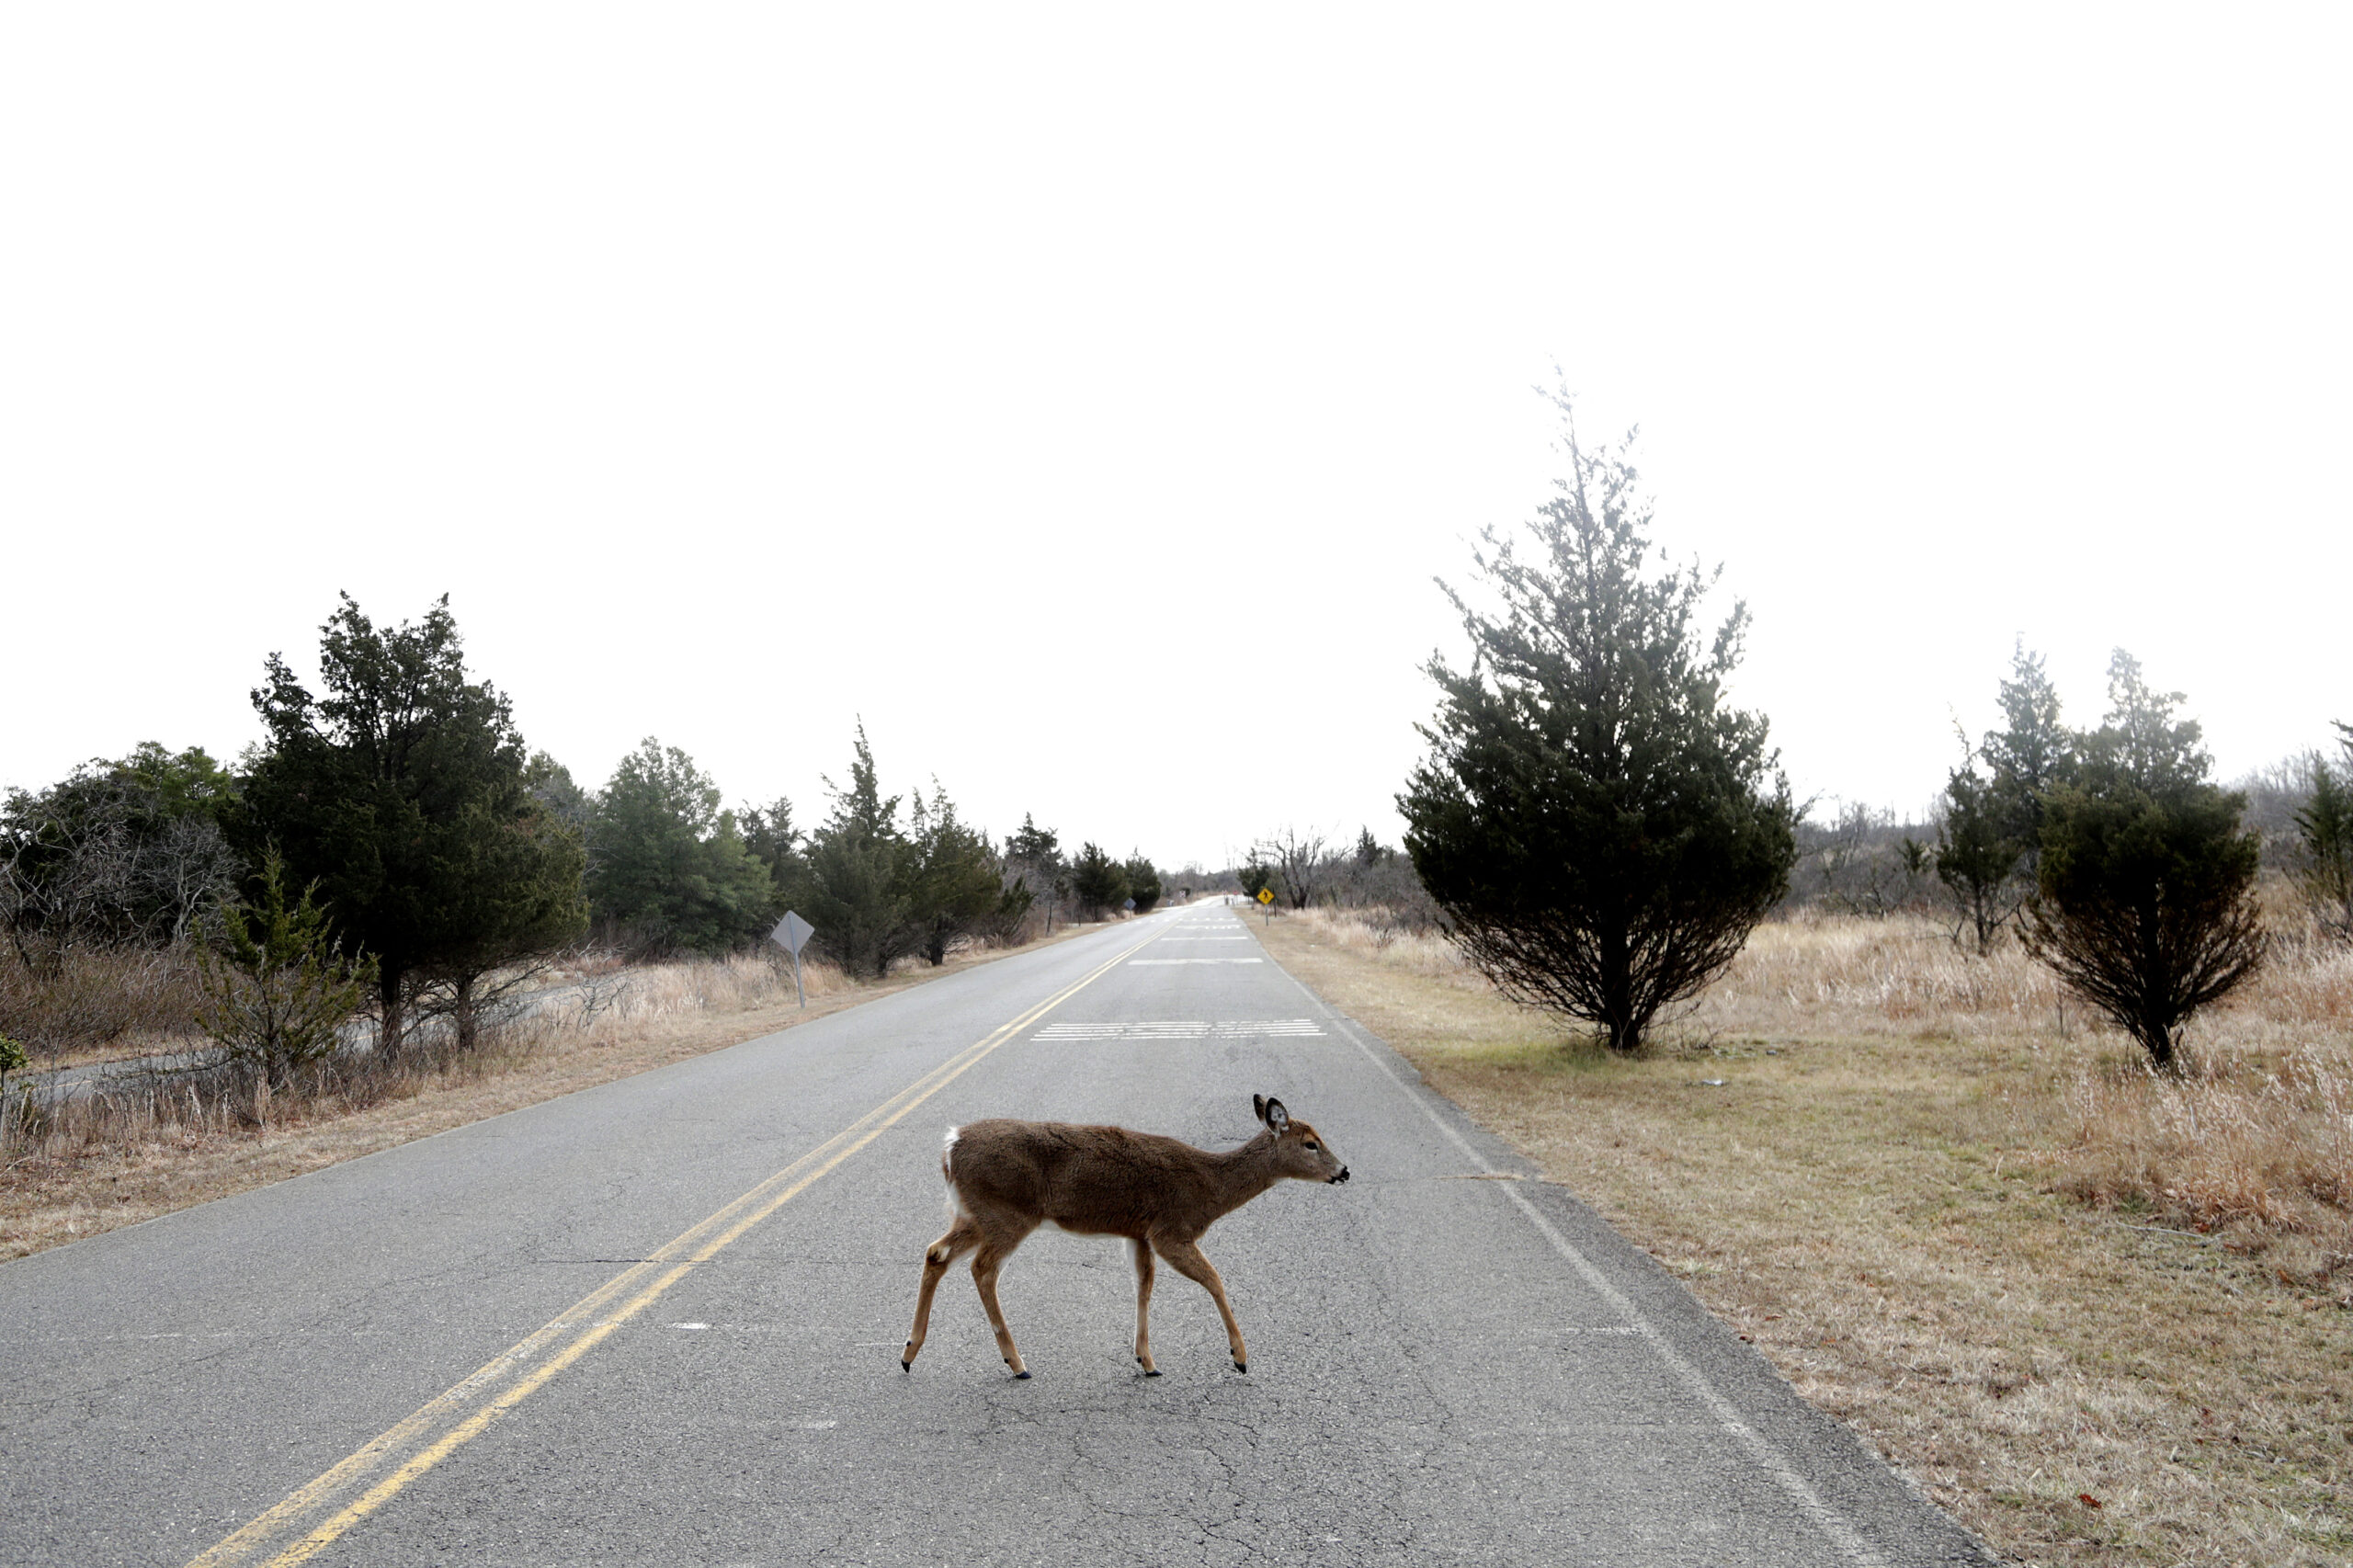 A whitetail deer walks acros an empty road in a park.